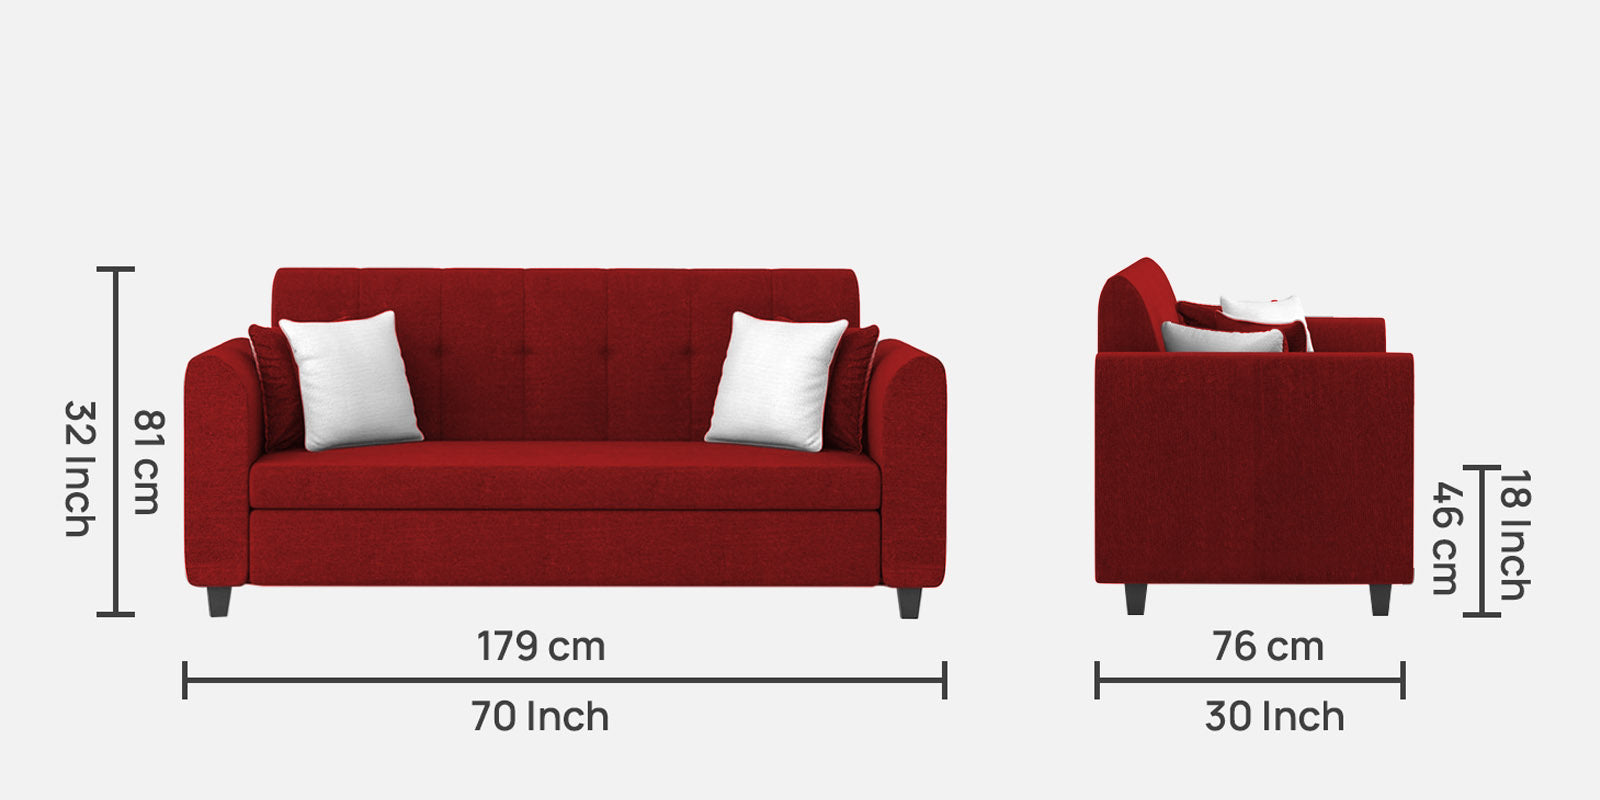 Denmark Fabric 3 Seater Sofa in Blood Maroon Colour